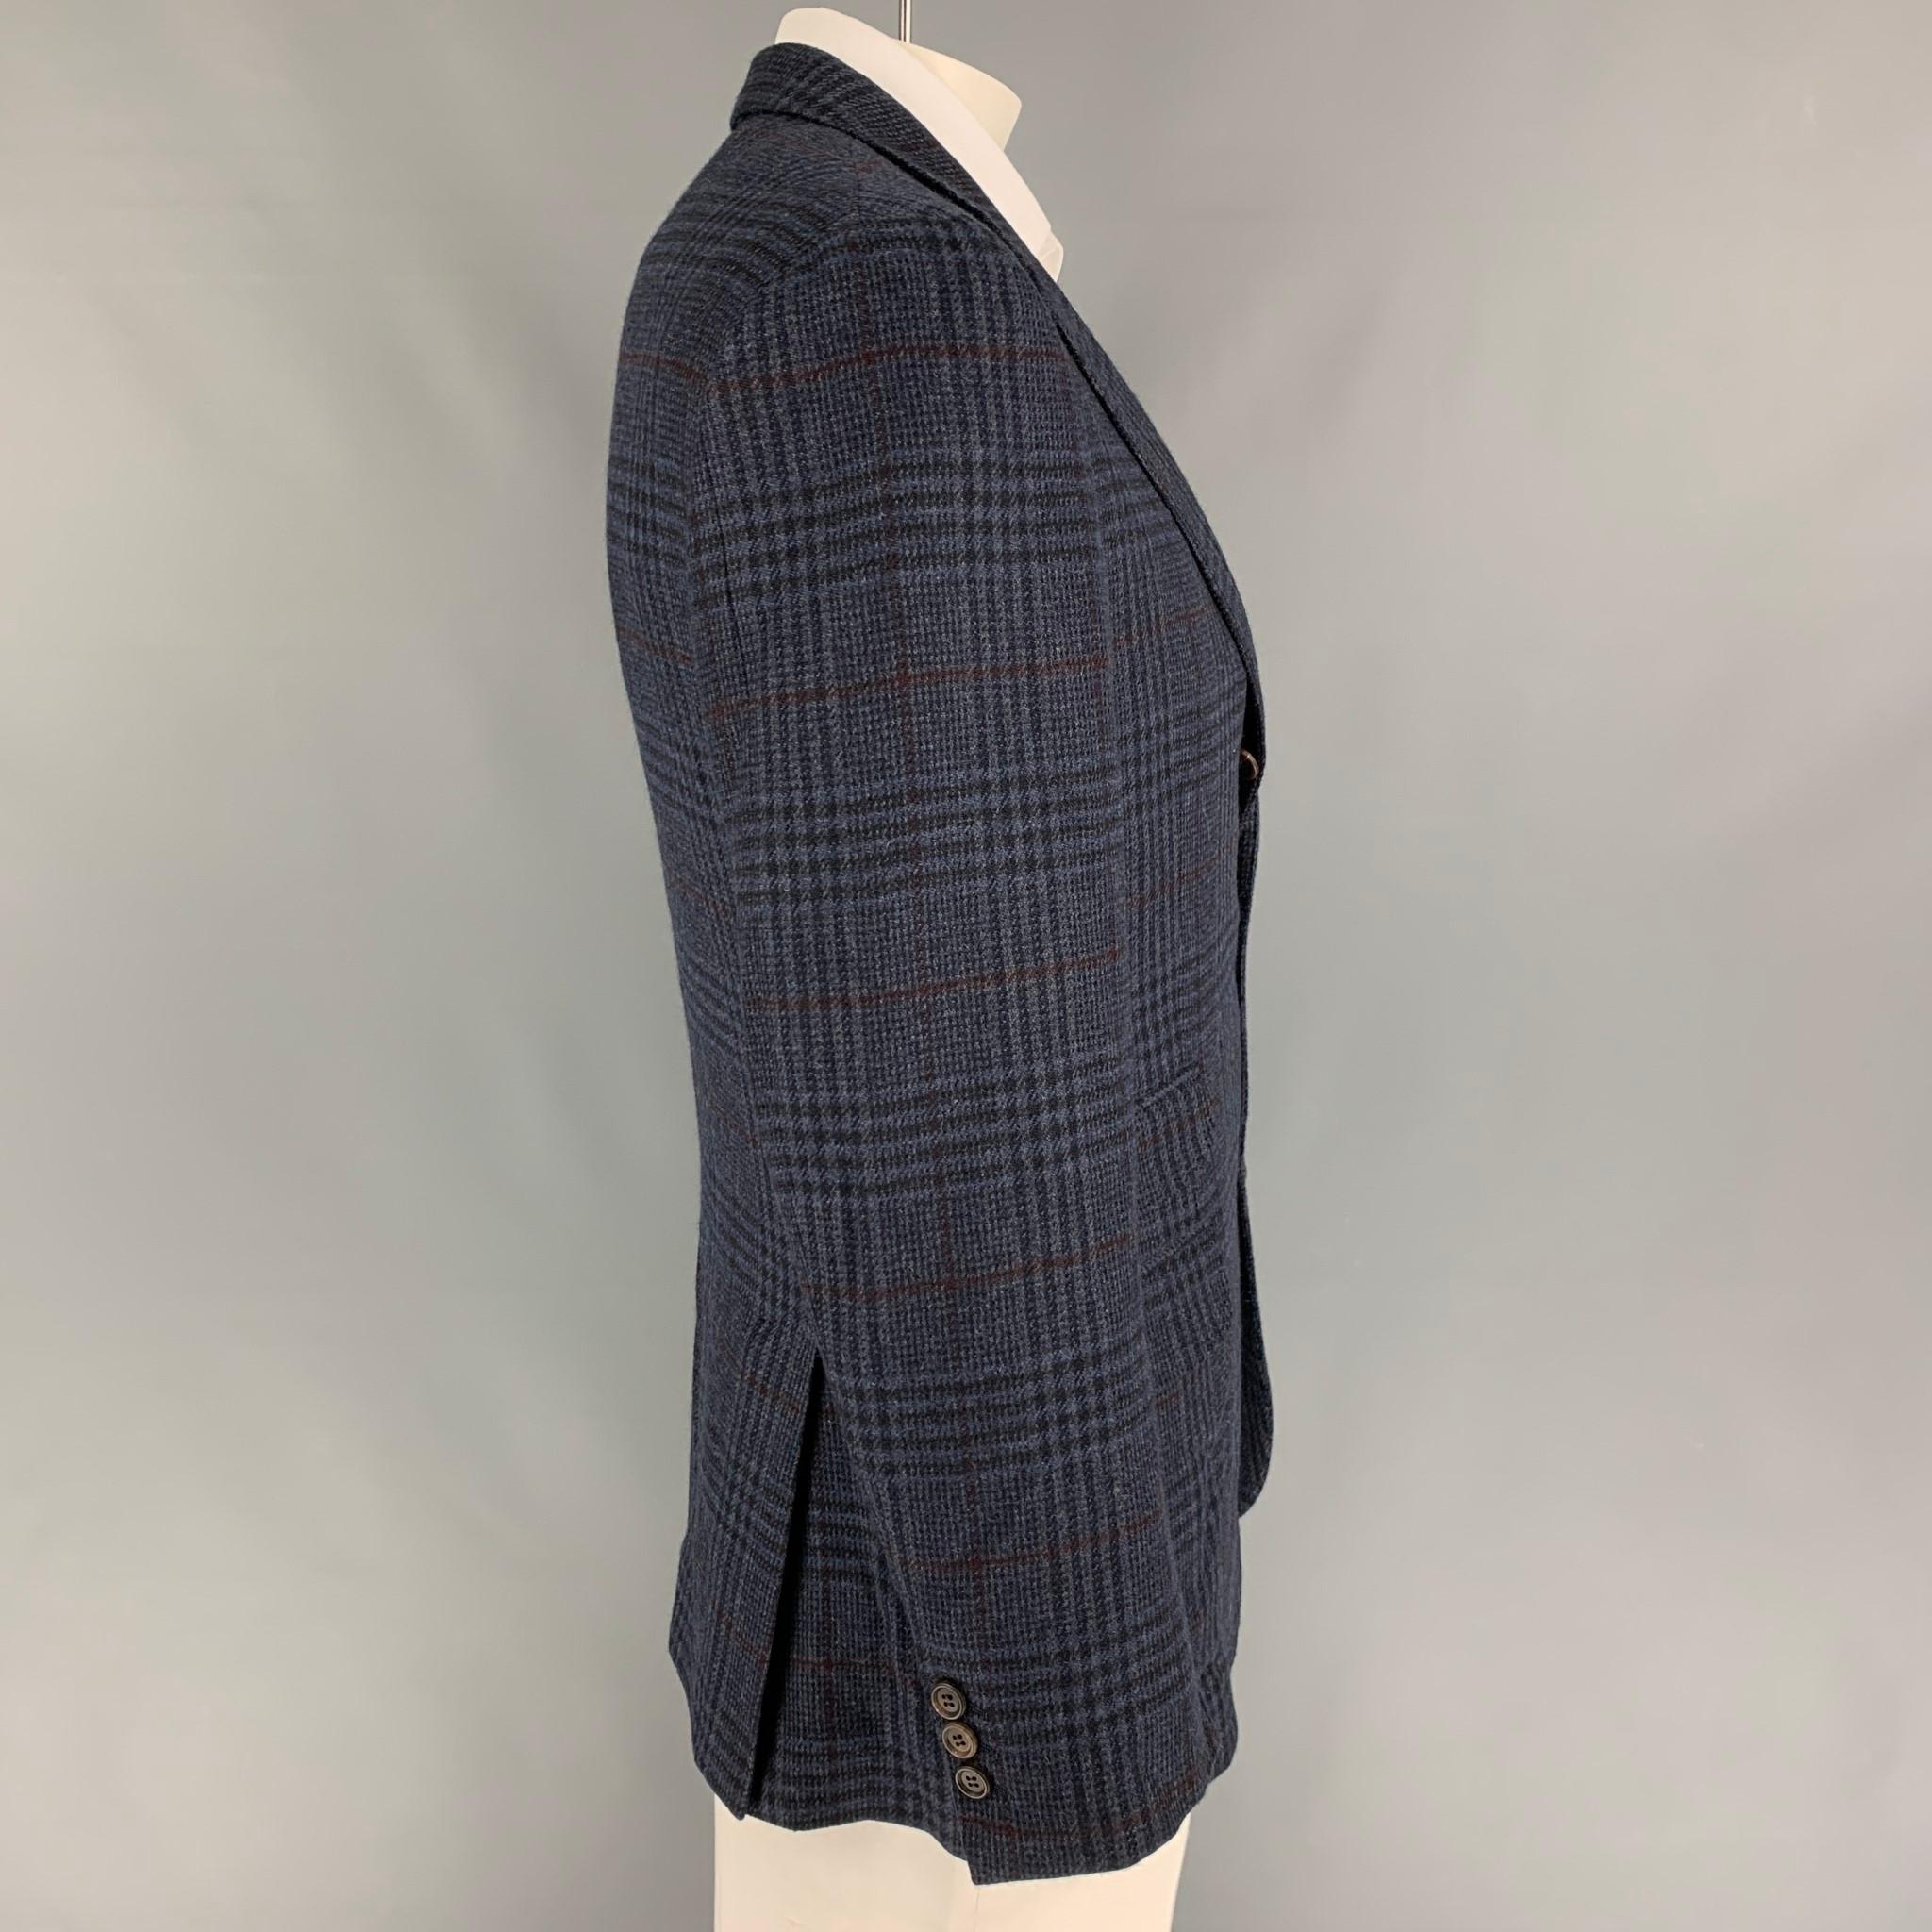 BRUNELLO CUCINELLI sport coat comes in a navy & gray plaid cashmere with a full liner featuring a notch lapel, flap pockets, double back vent, and a three button closure. Made in Italy. 

Very Good Pre-Owned Condition.
Marked: